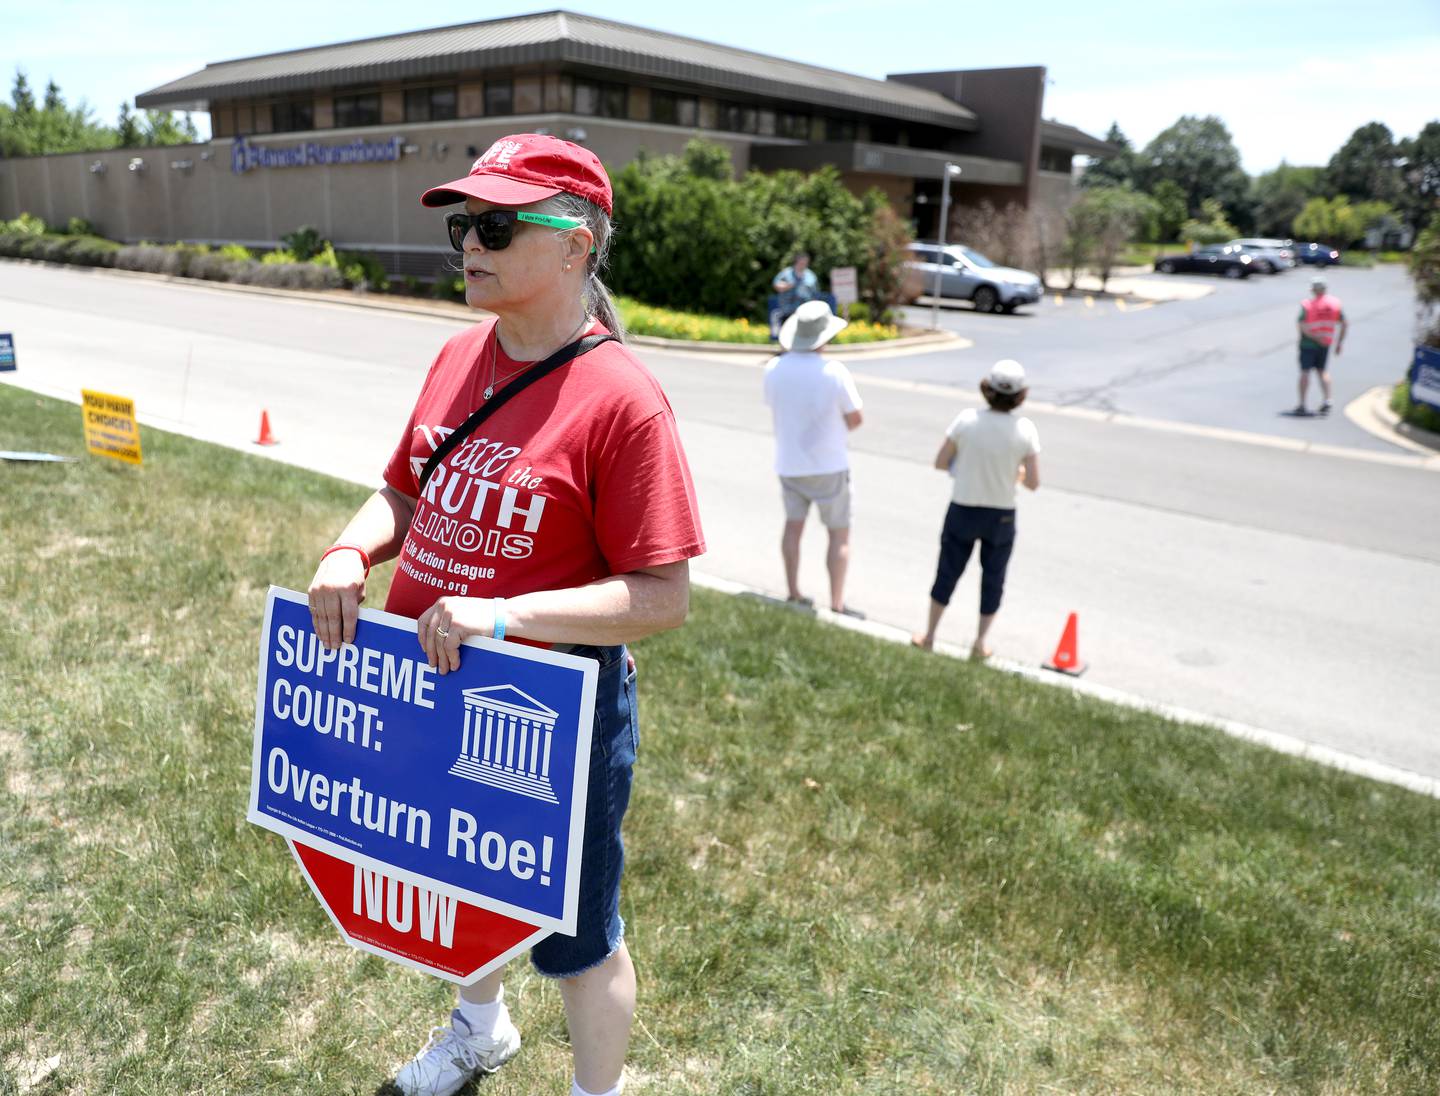 Corrine Marsala of Bolingbrook stands across the street from the Planned Parenthood health center in Aurora on Friday, June 24, 2022 a few hours after news broke regarding The Supreme Court’s decision to overturn Roe vs. Wade.